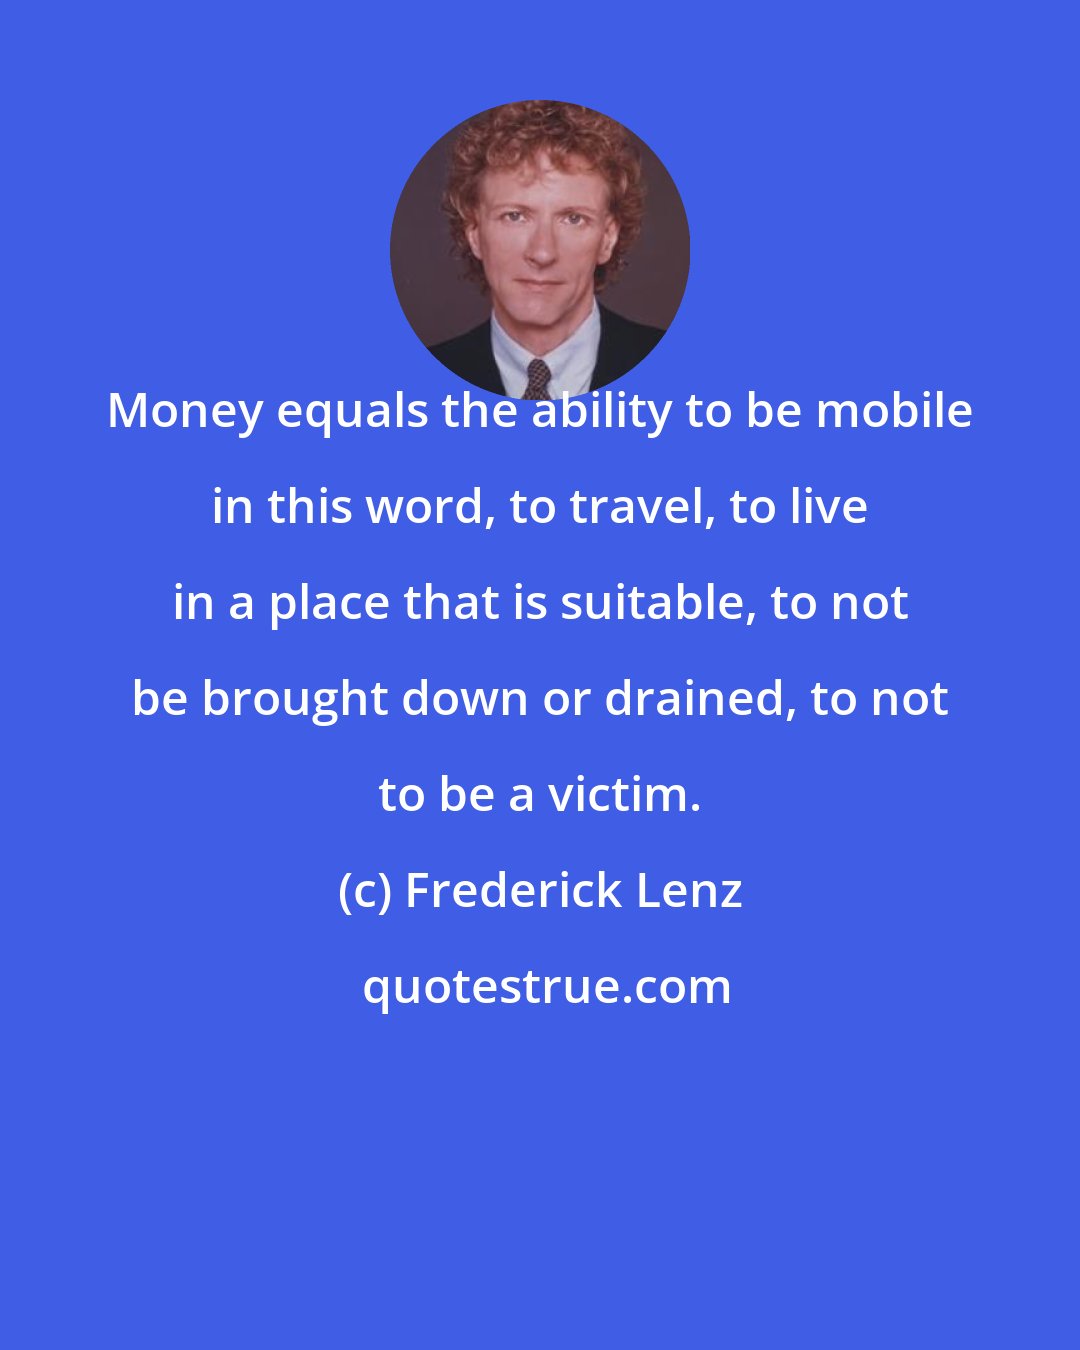 Frederick Lenz: Money equals the ability to be mobile in this word, to travel, to live in a place that is suitable, to not be brought down or drained, to not to be a victim.